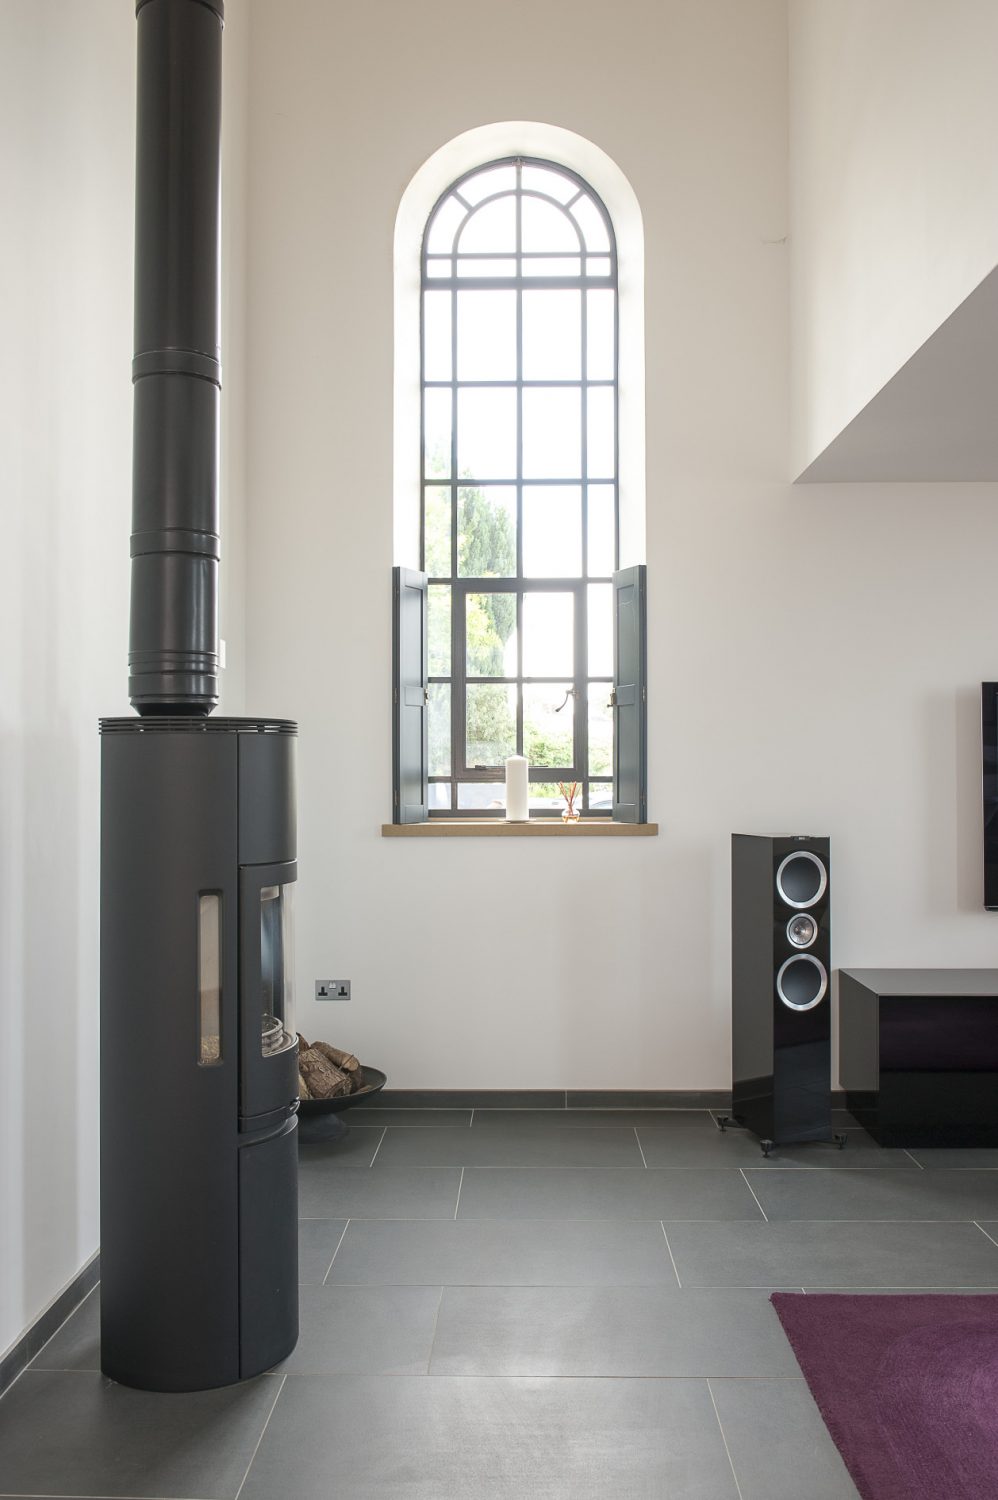 At one end of the room is a contemporary Contura woodburner, the tallest that Nick and Sonja could find